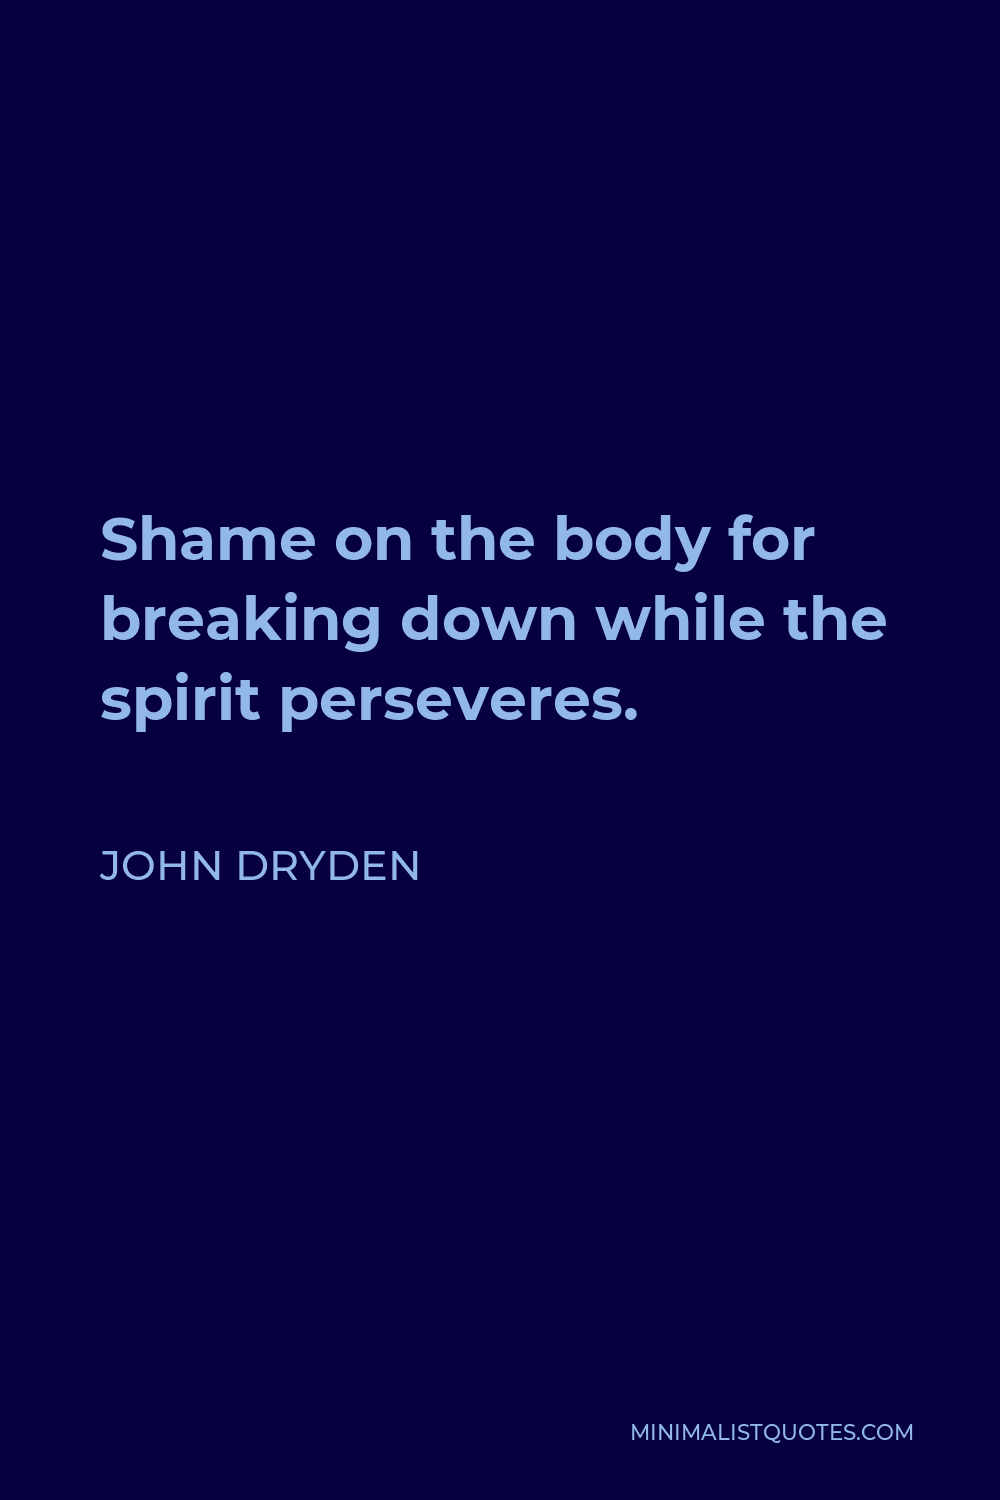 John Dryden Quote - Shame on the body for breaking down while the spirit perseveres.